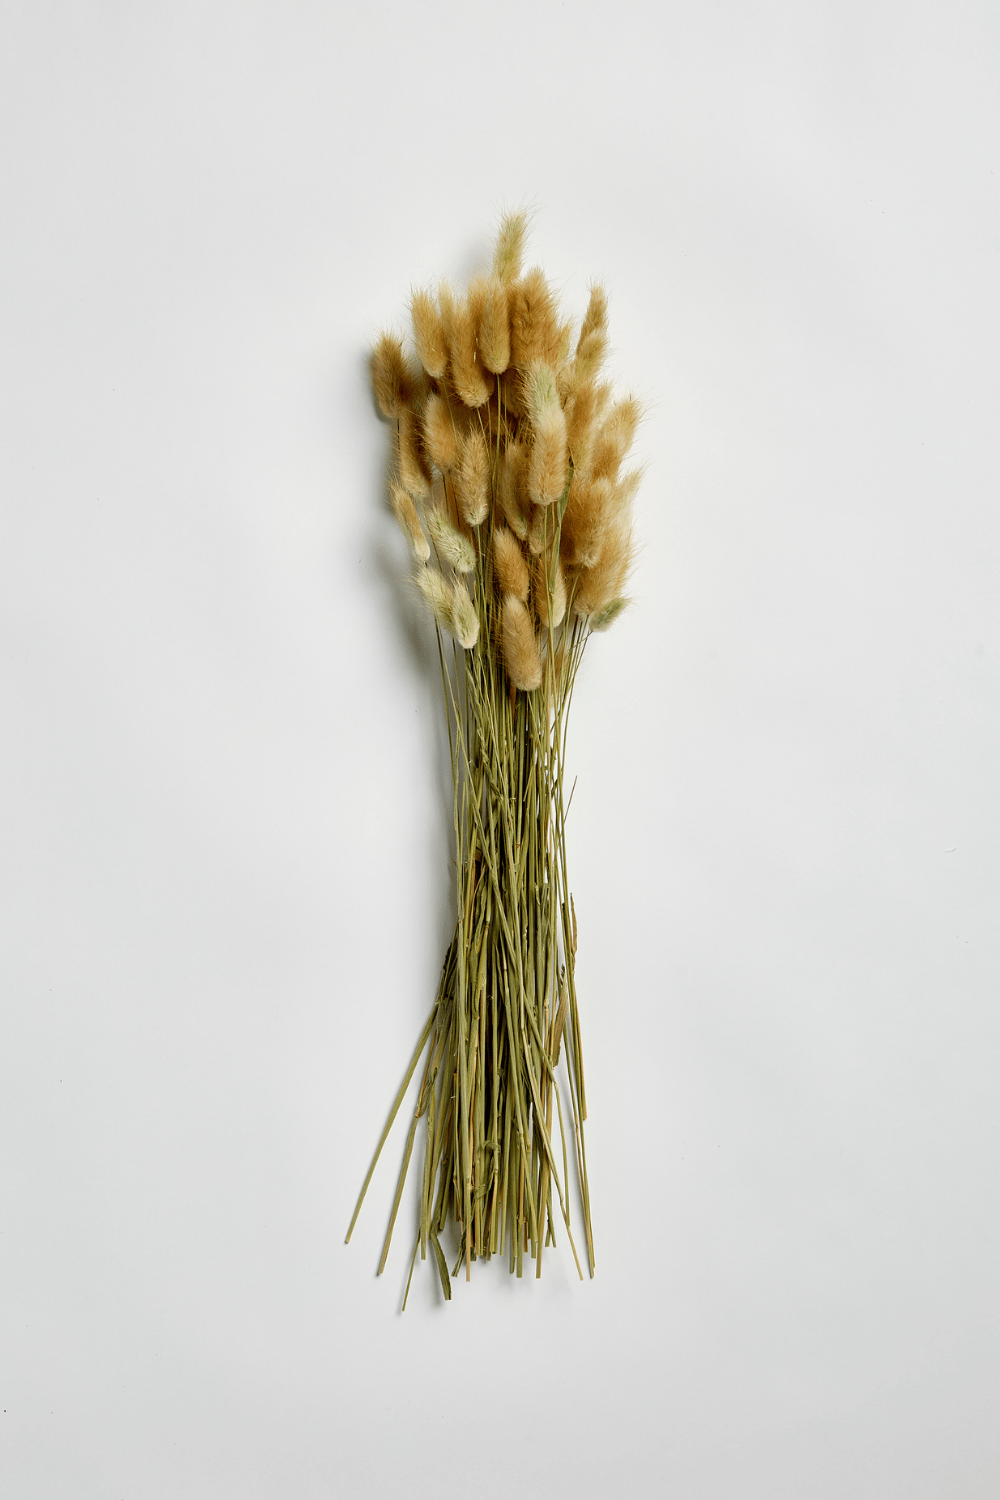 BUNNY TAILS Natural - Luxe B Pampas Grass  Canada , ships via Canada Post from Edmonton 